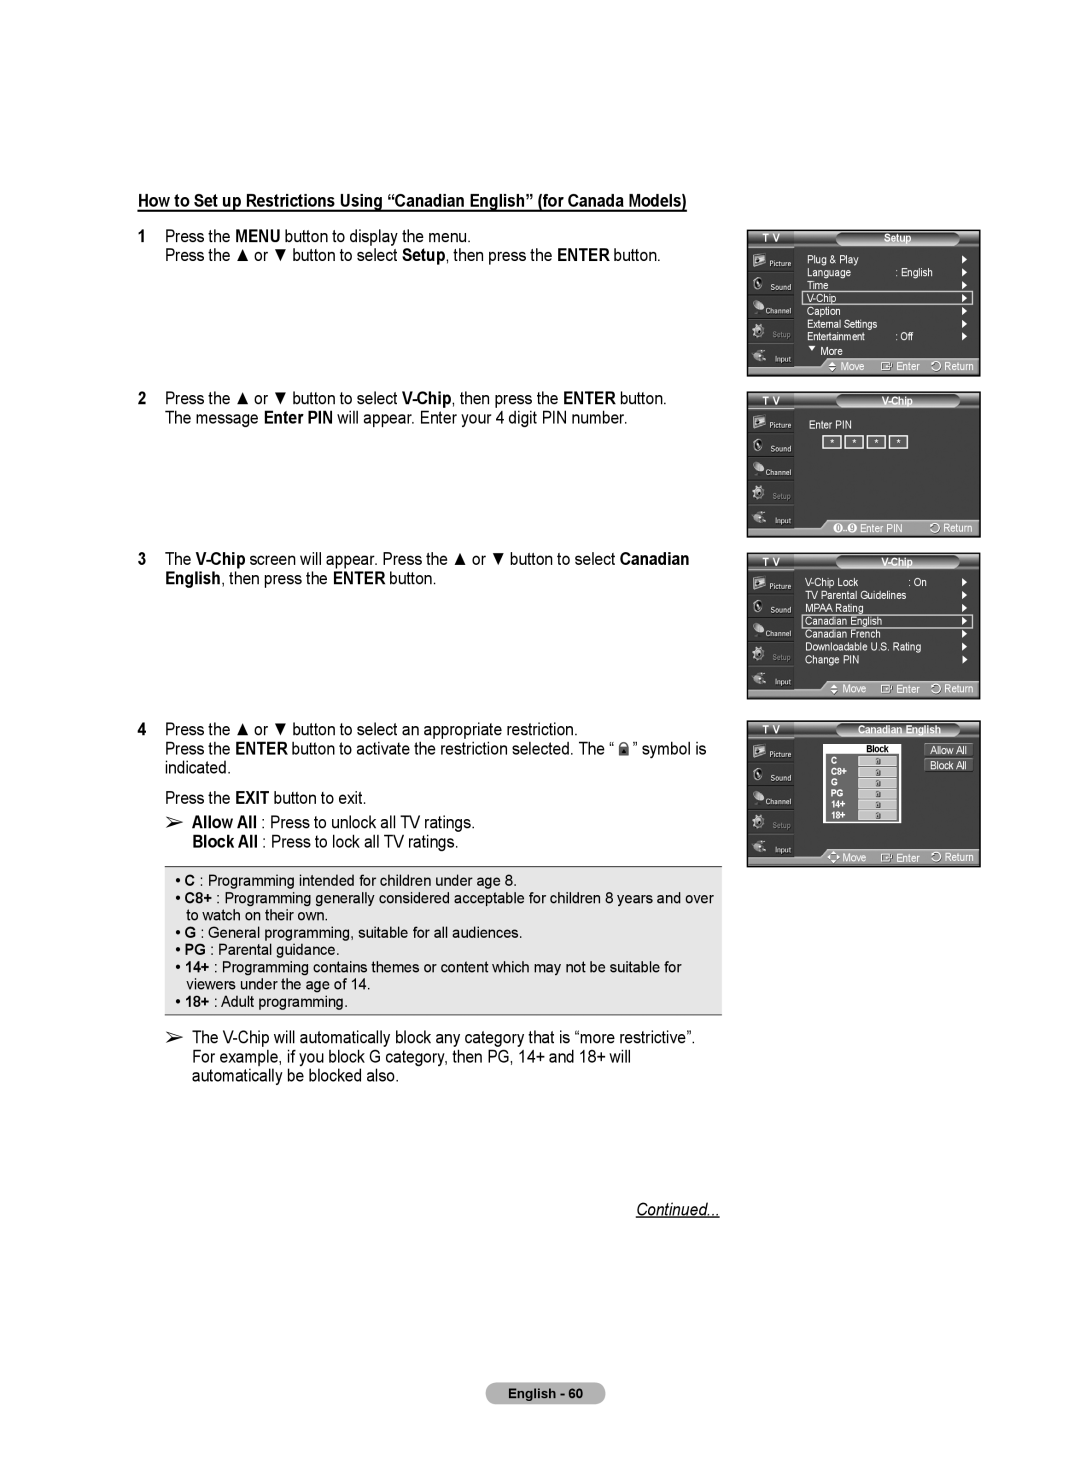 Samsung 460 user manual How to Set up Restrictions Using “Canadian English” for Canada Models, Continued 